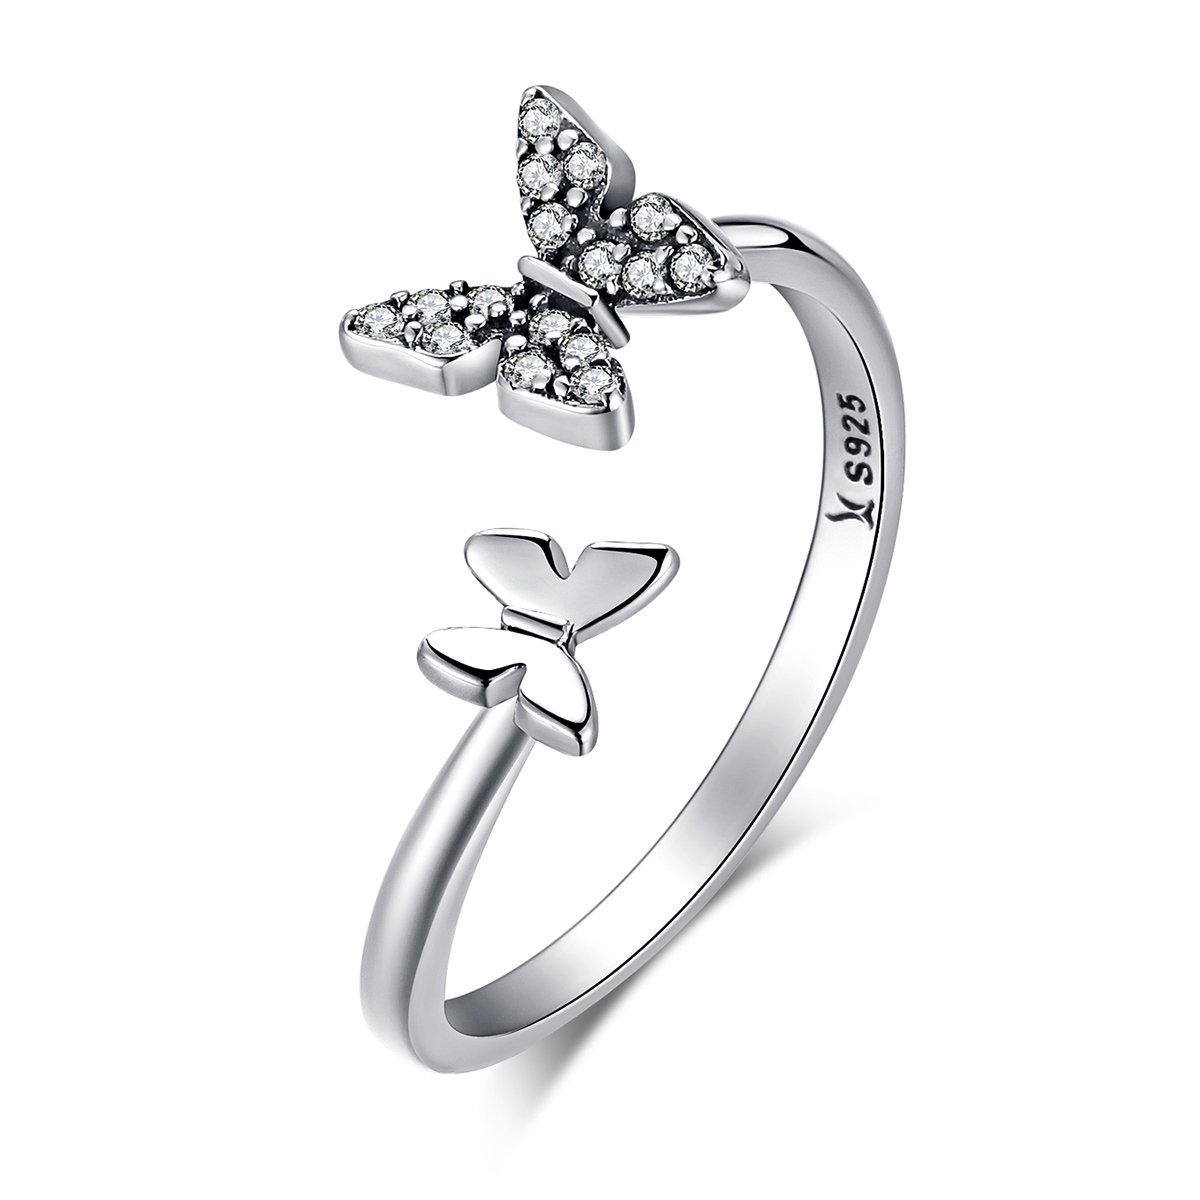 200 +best ring design collections|for girls , women and you.